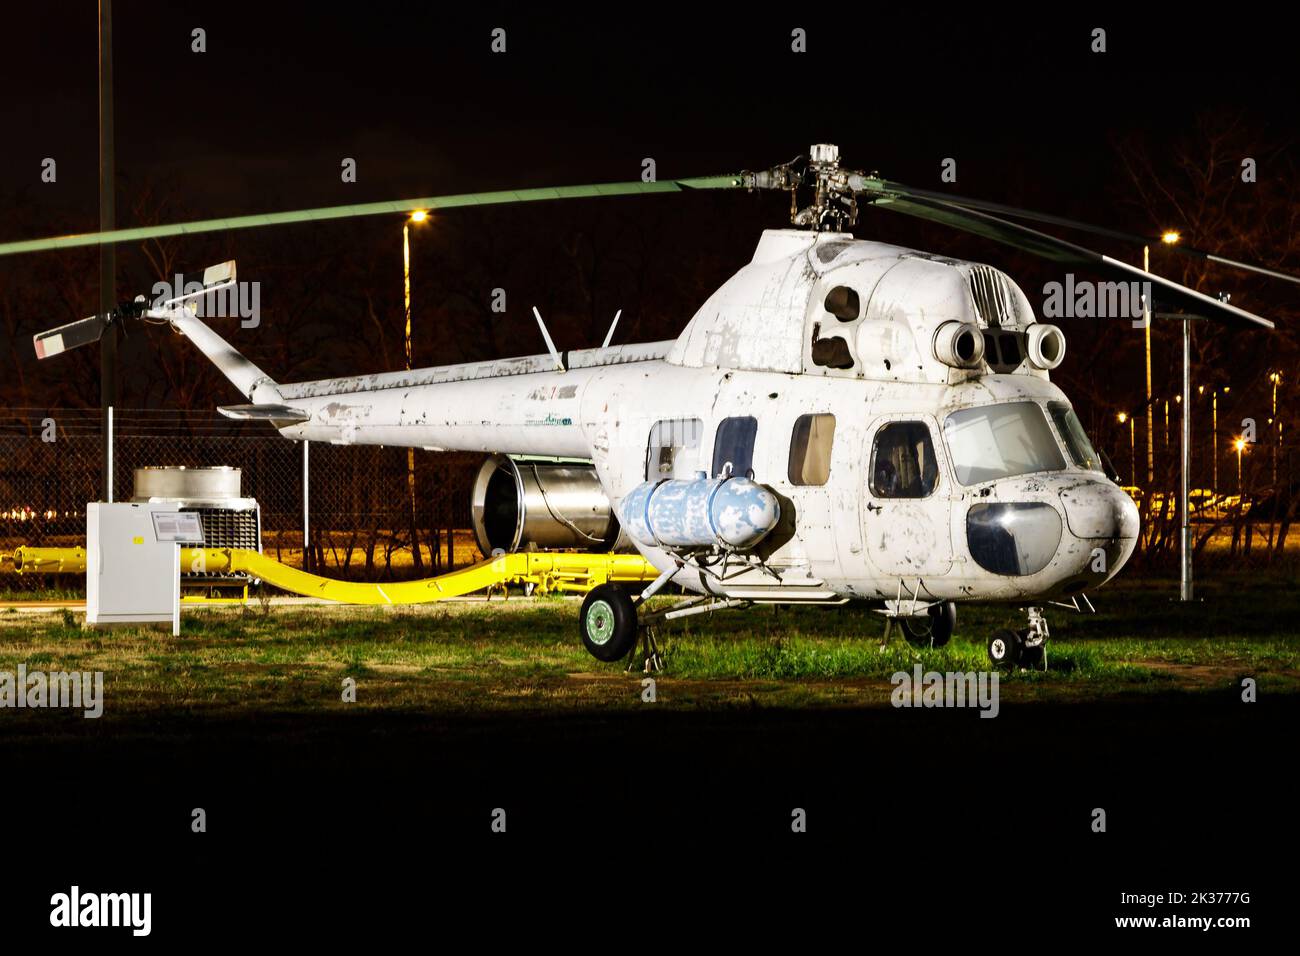 Budapest, Hungary - December 6, 2017: Commercial helicopter at airport and airfield. Rotorcraft. General aviation industry. Civil utility transportati Stock Photo